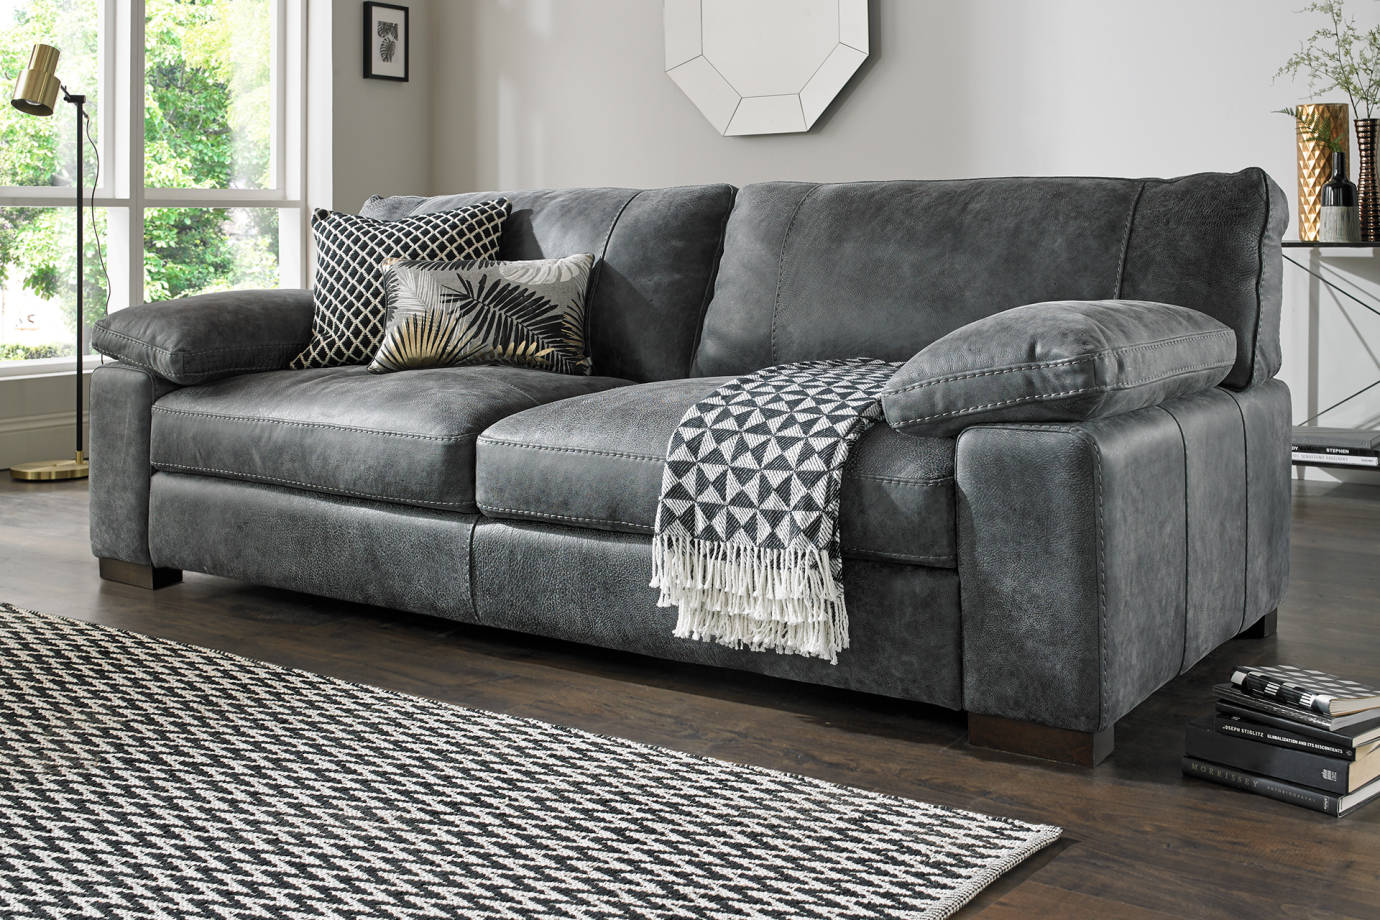 Leather Sofas Sofology, Gray Leather Sofas Living Room